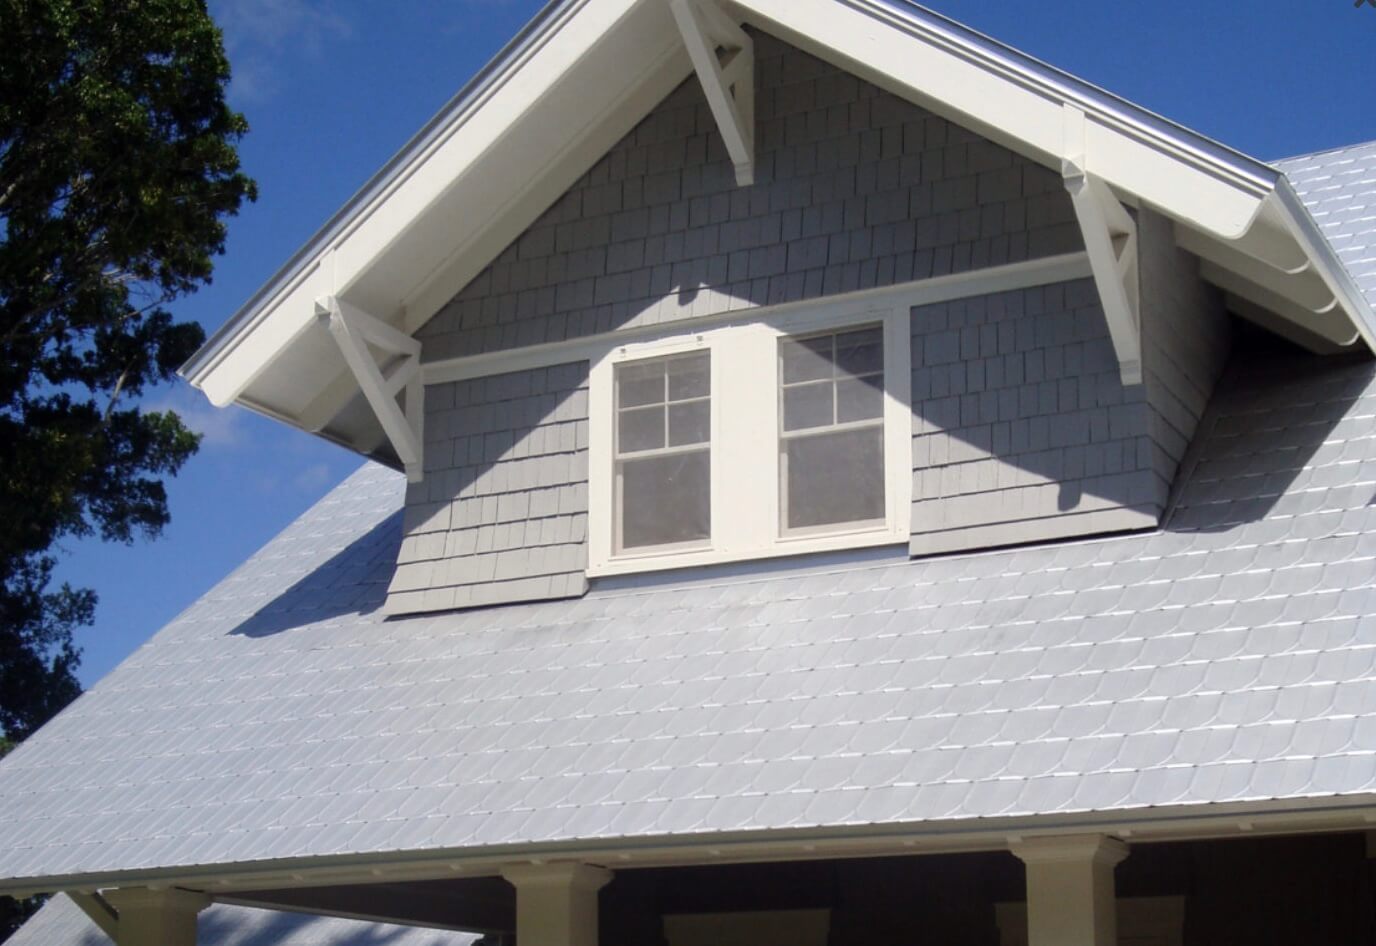 victorian metal shingles on a standard roofline with a gable dormer